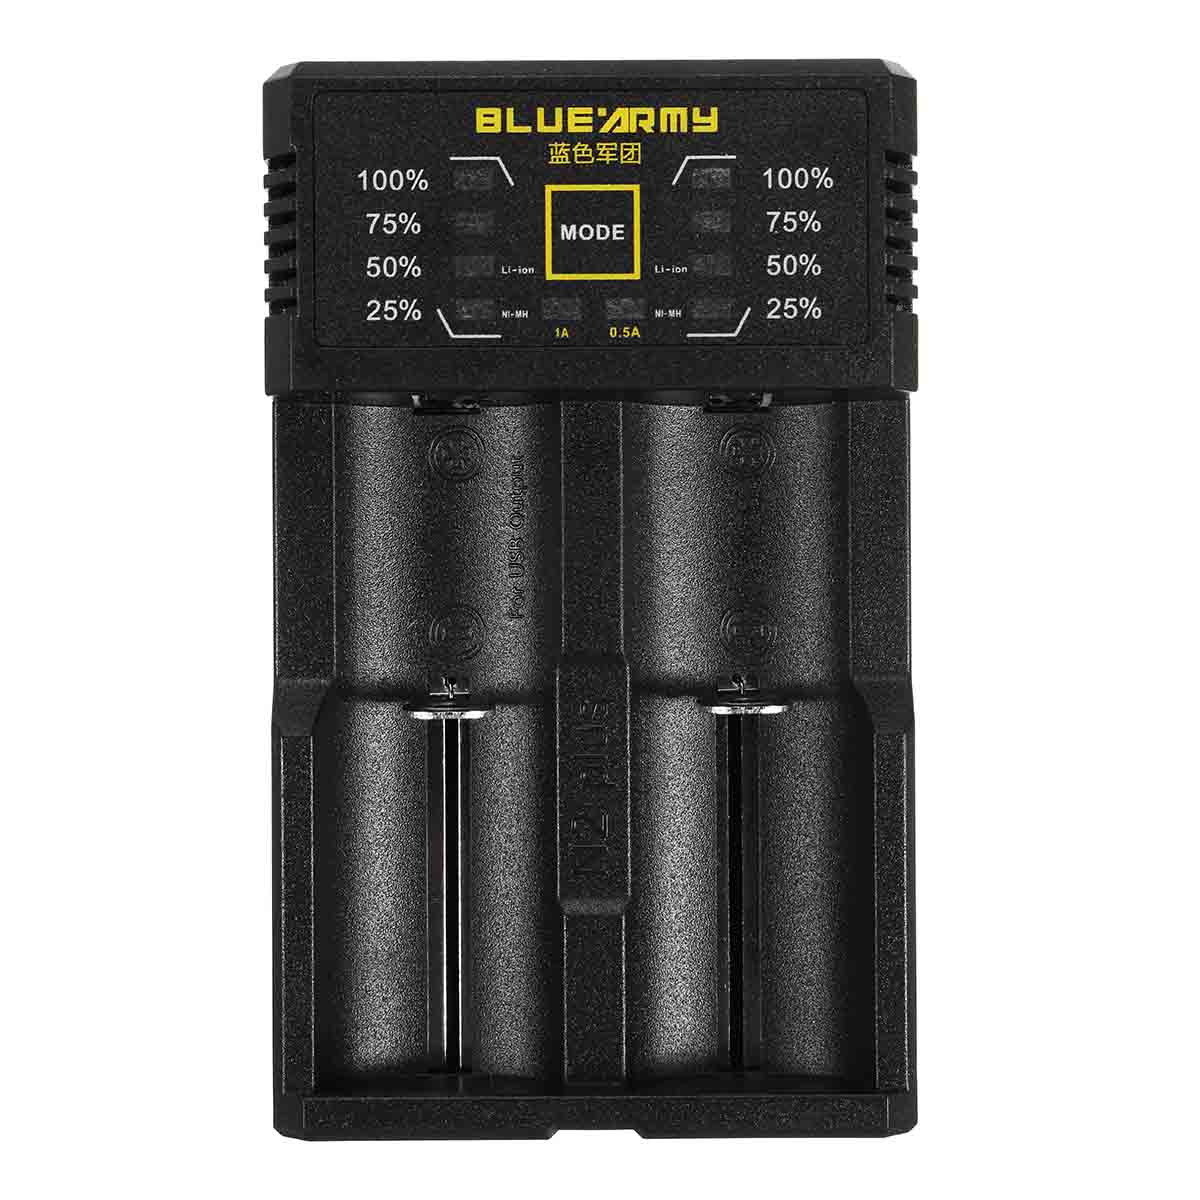 Blue-Army-N1N2-Plus-Smart-Battery-Charger-Single-Double-Slot-for-IMRLi-ionNi-MHNi-Cd-26650-18650-1217135